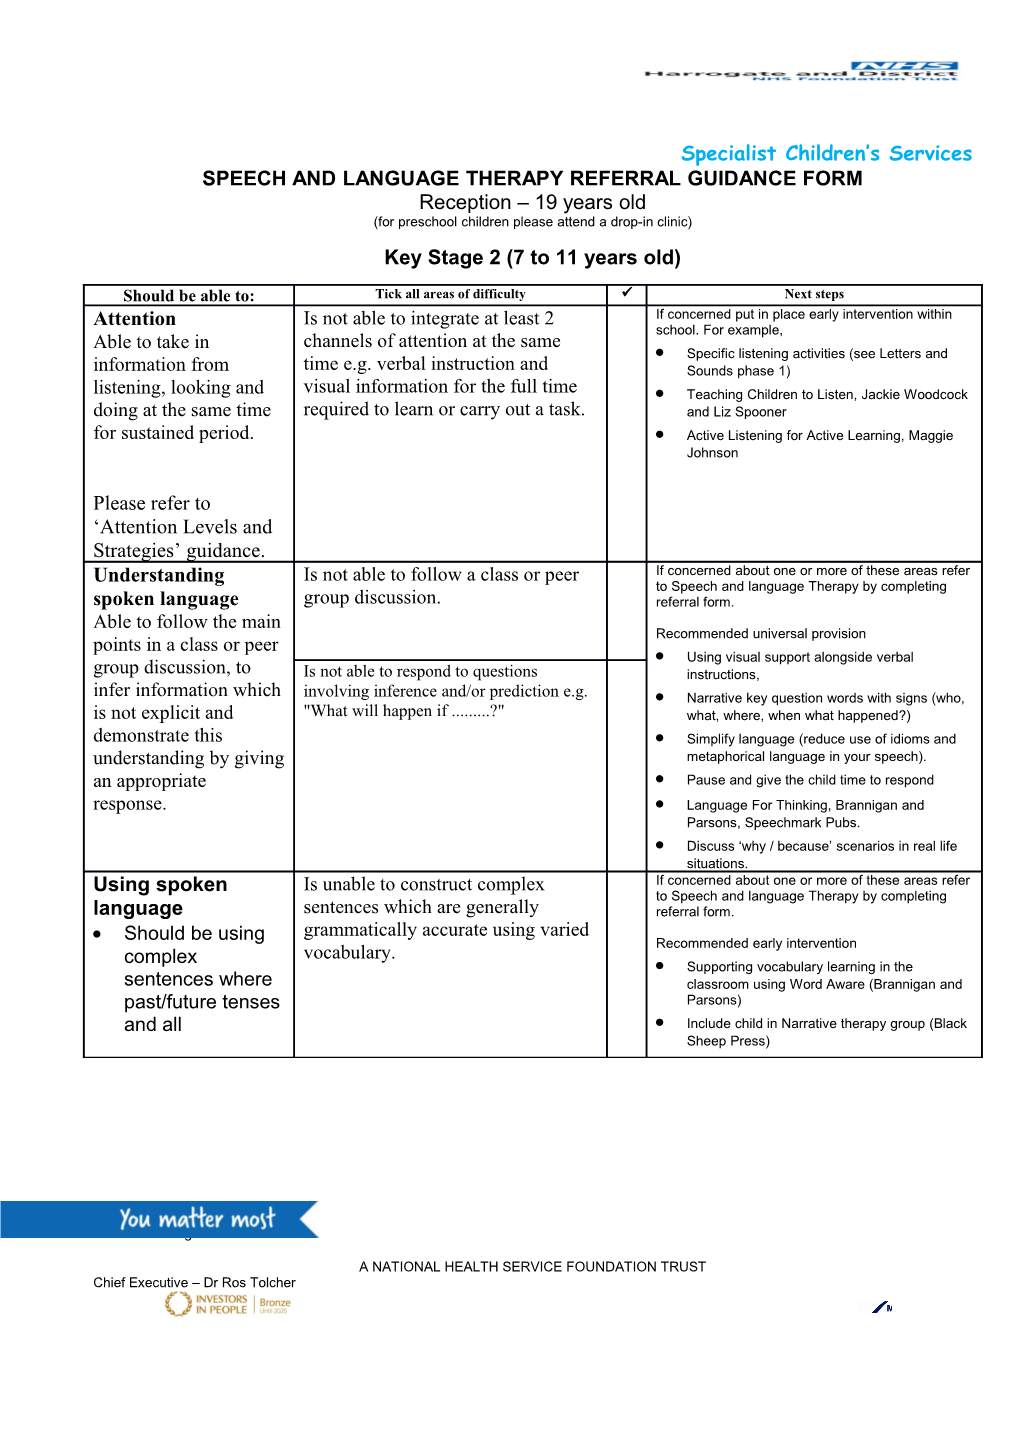 Speech and Language Therapy Referral Guidance Form